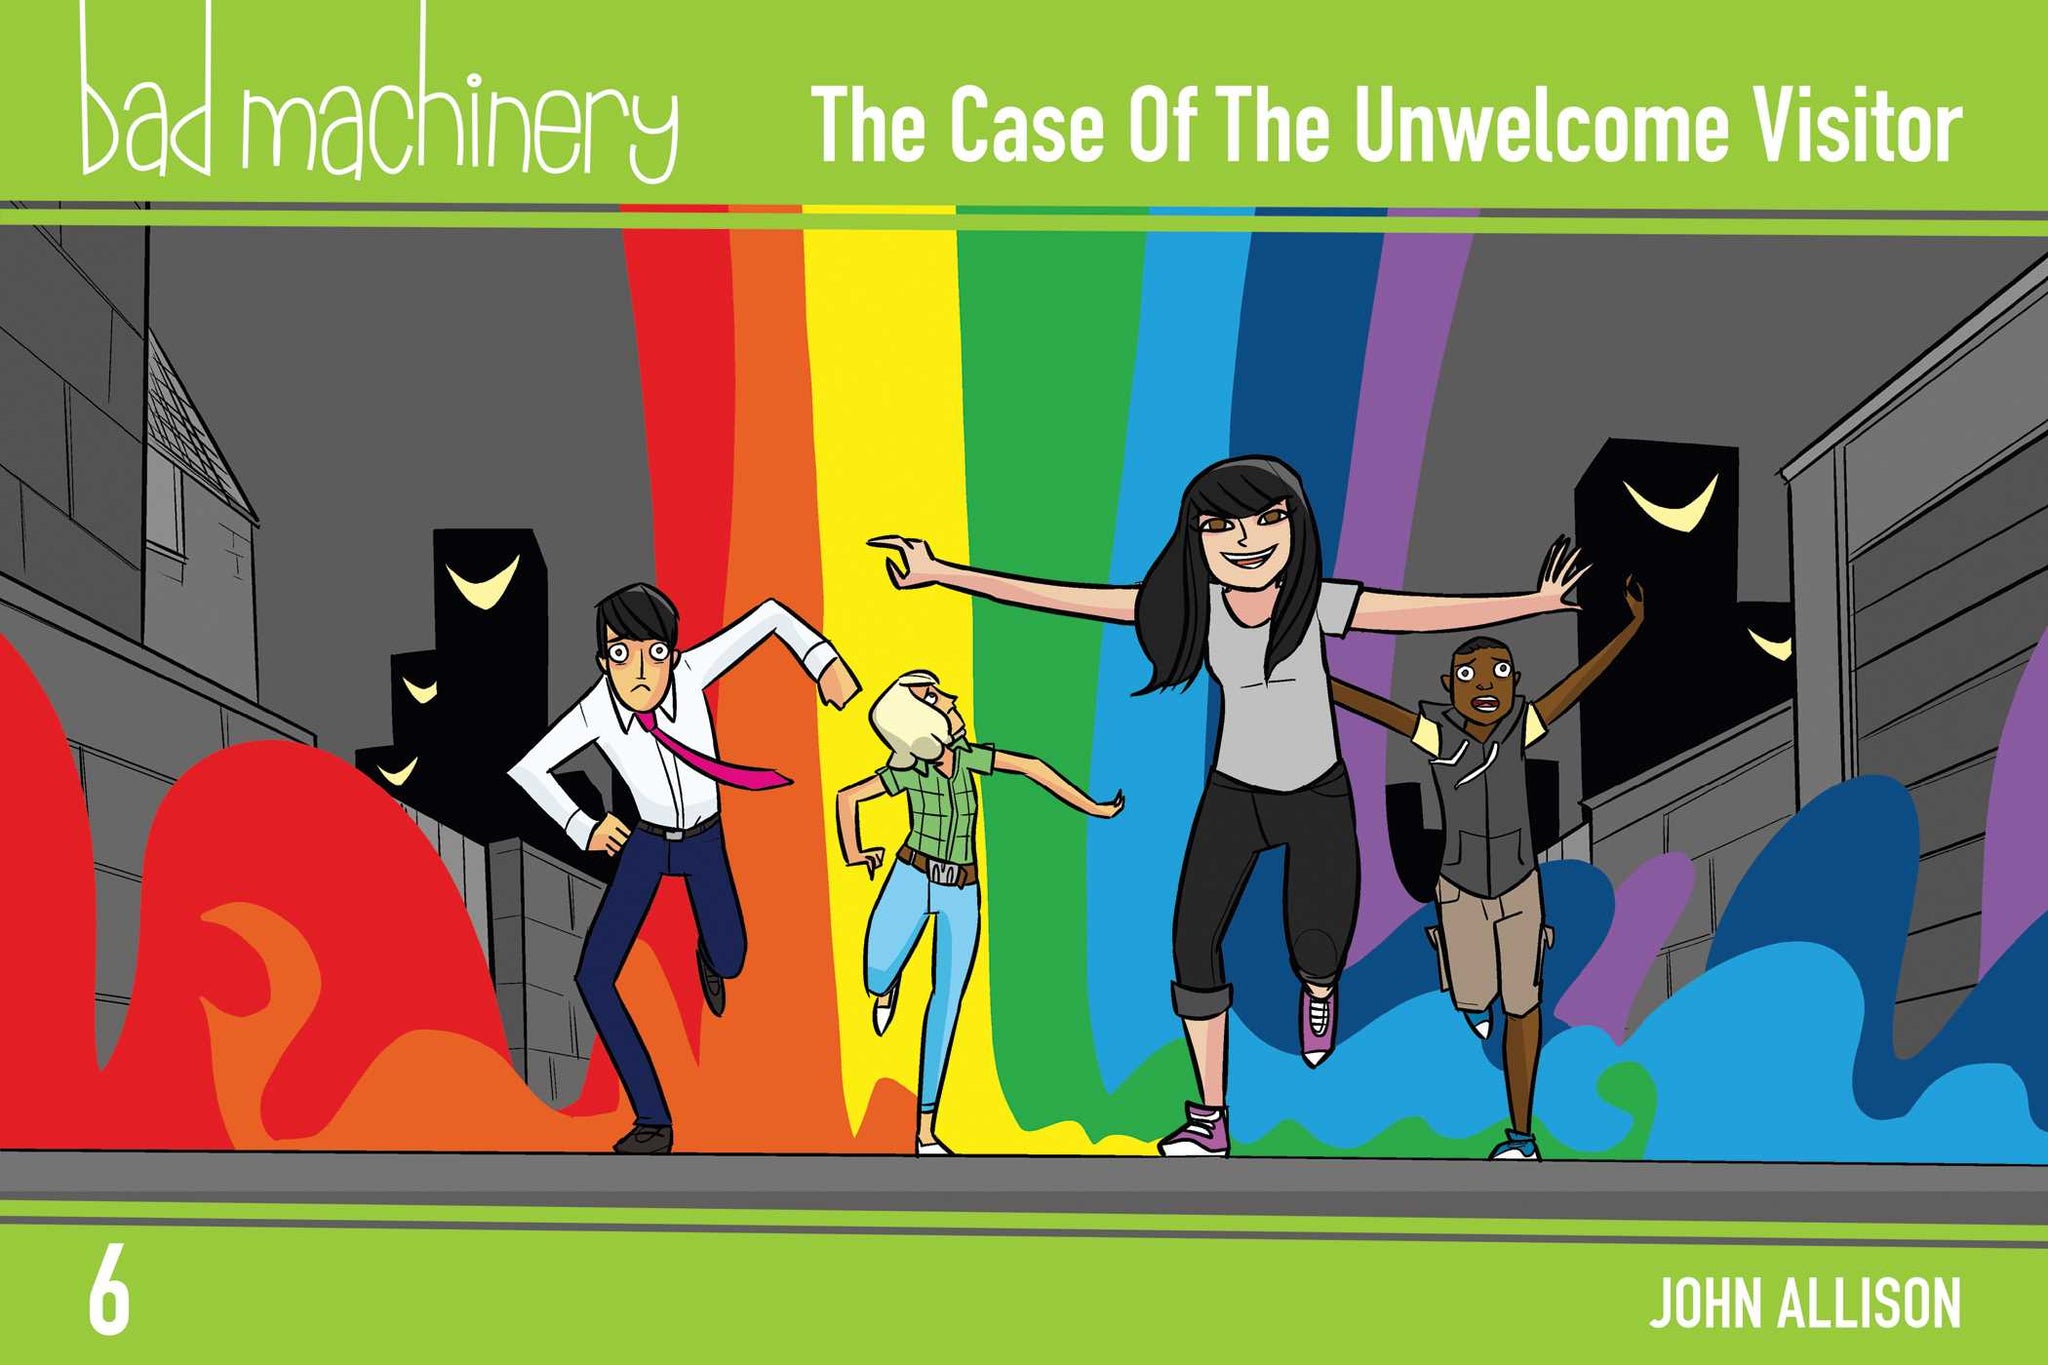 Bad Machinery Vol. 6 : The Case of the Unwelcome Visitor, Pocket Edition